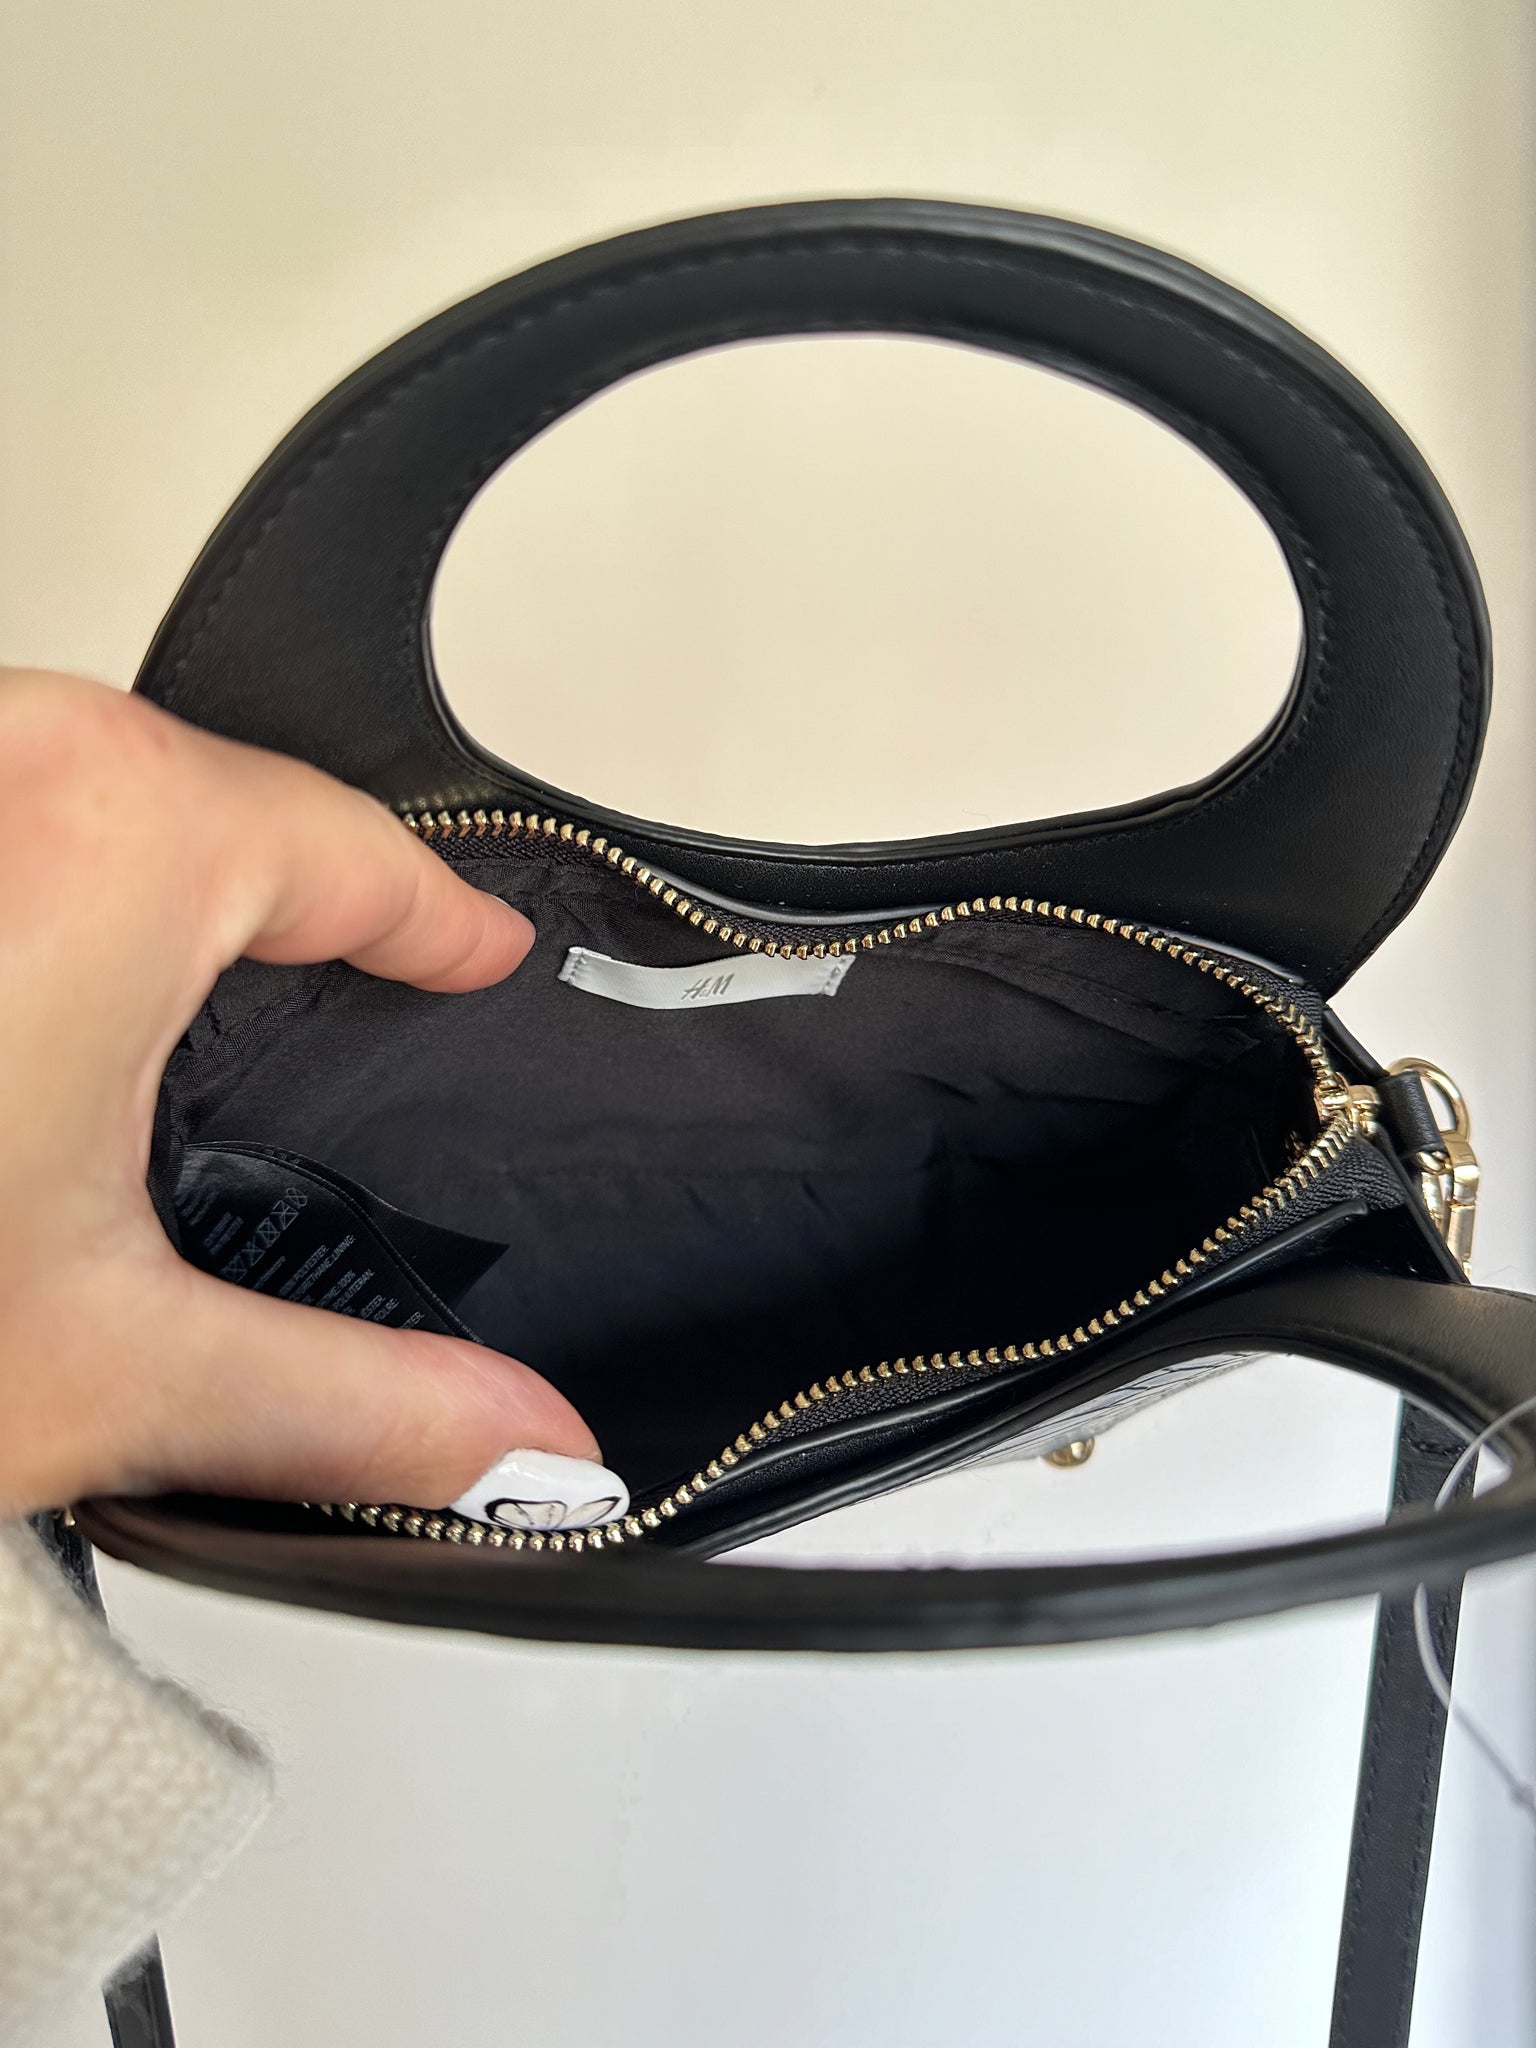 H&M Black Bag - New with Tags